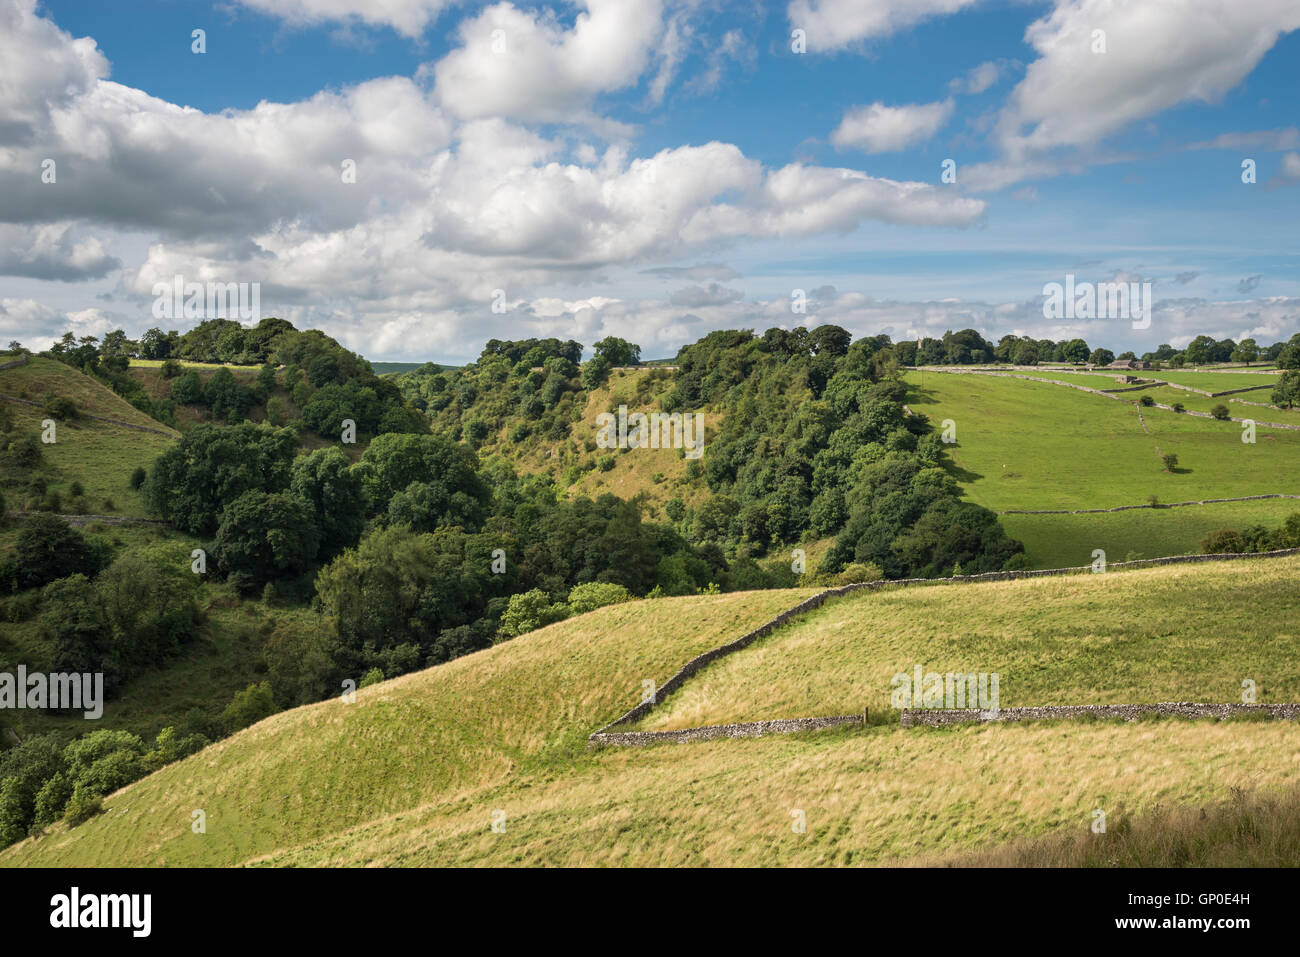 View of the Dove valley near Milldale in the Peak District. Green trees cling to the steep slopes. Stock Photo